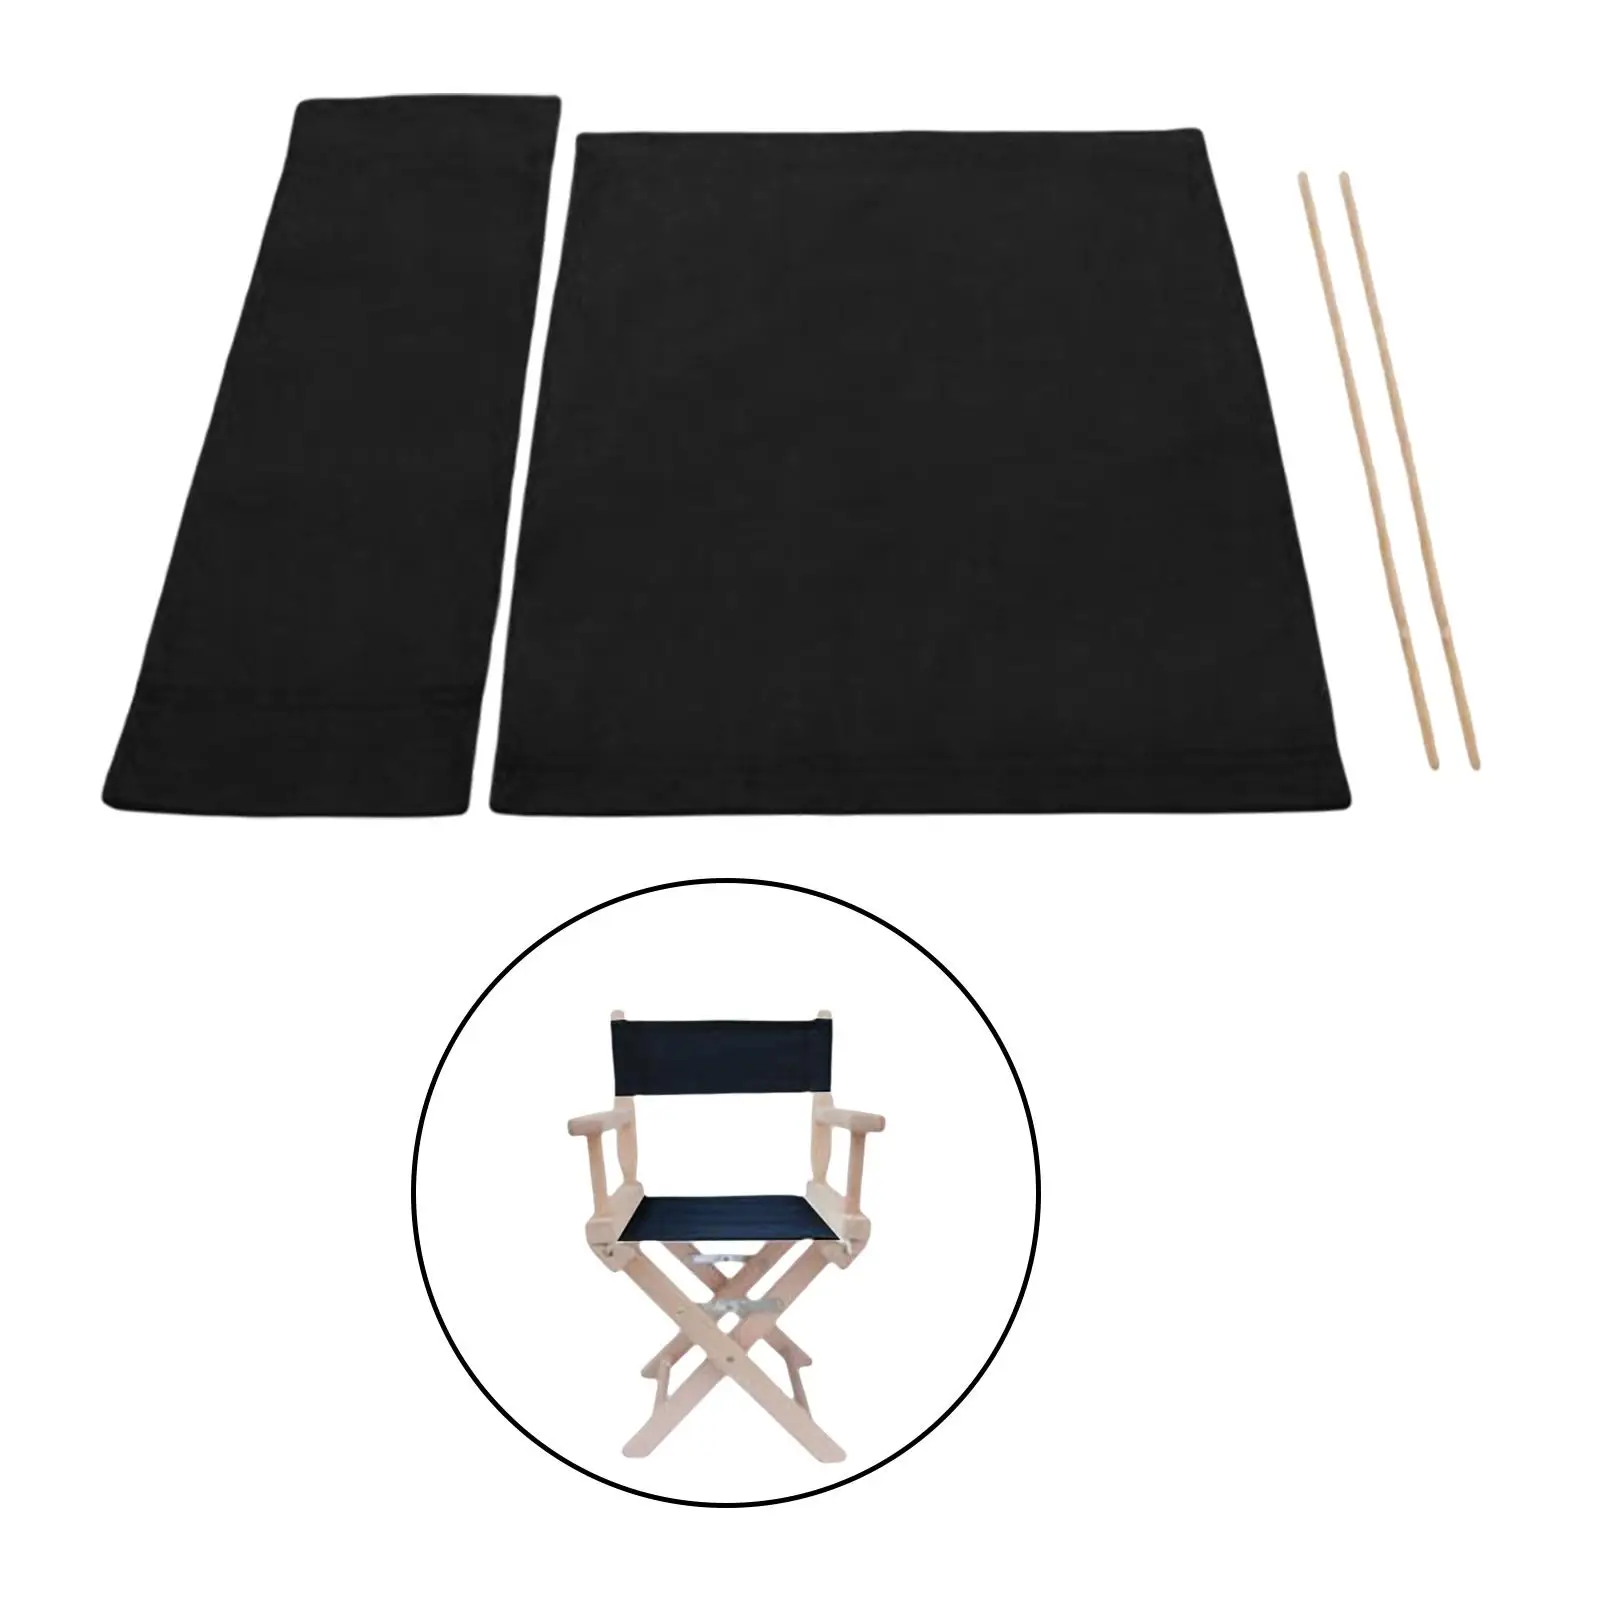 Directors Chairs Cover Patio Covers Stool Protector for makeup Chair